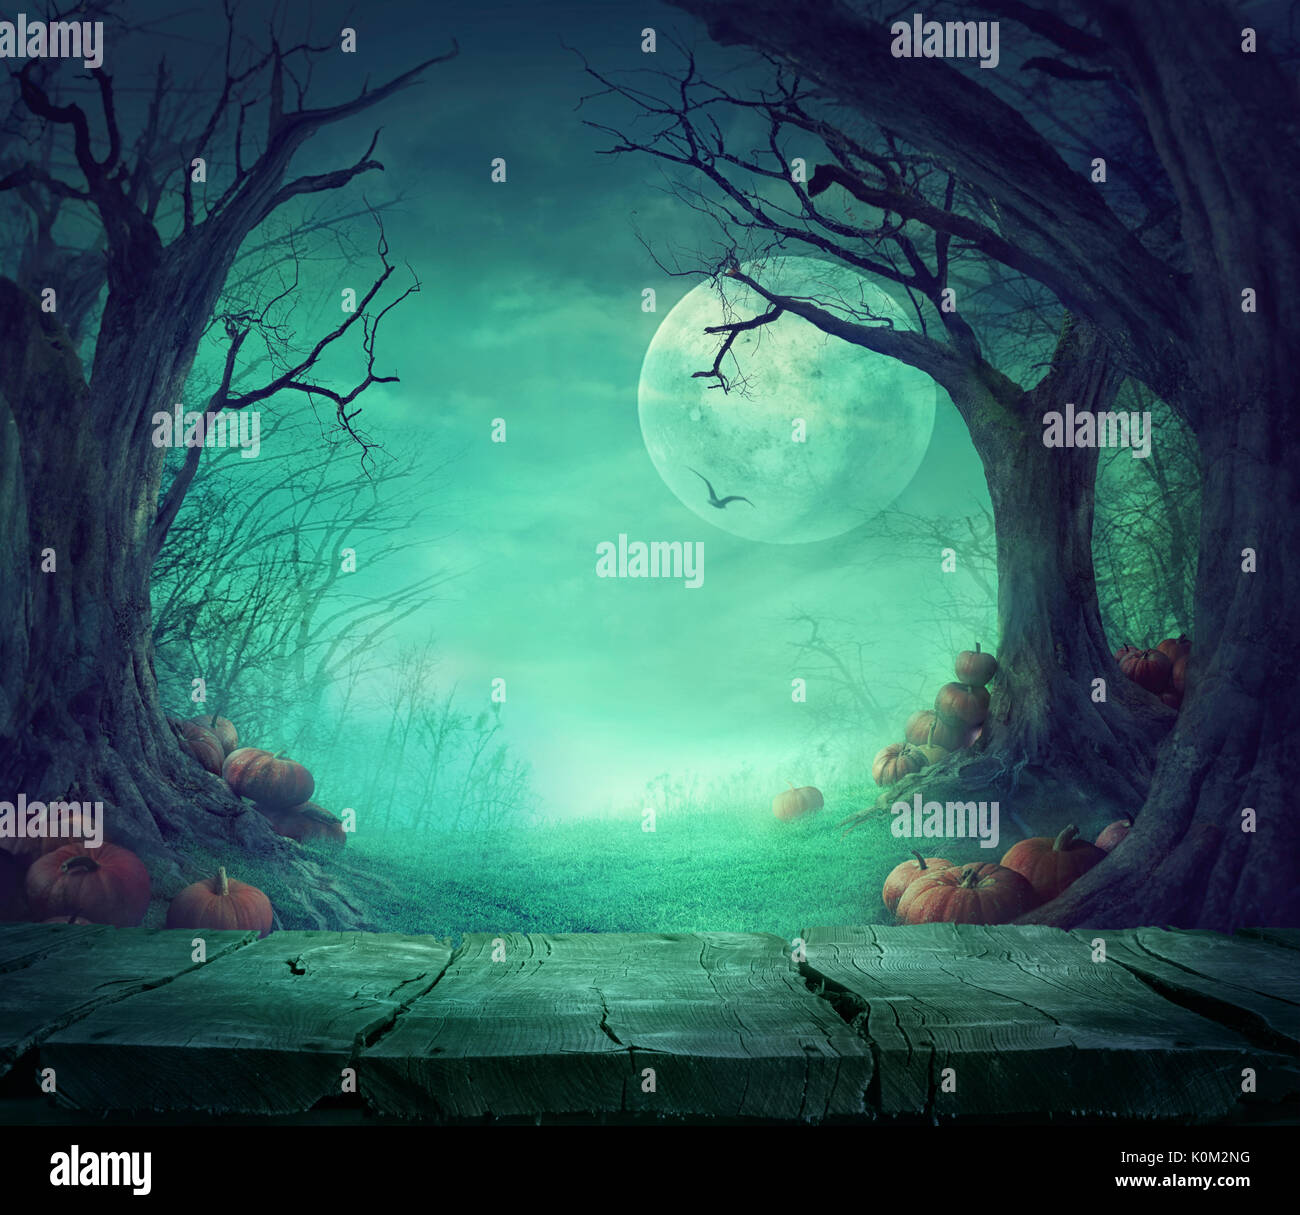 Spooky Halloween Backgrounds | Wallpapers Quality